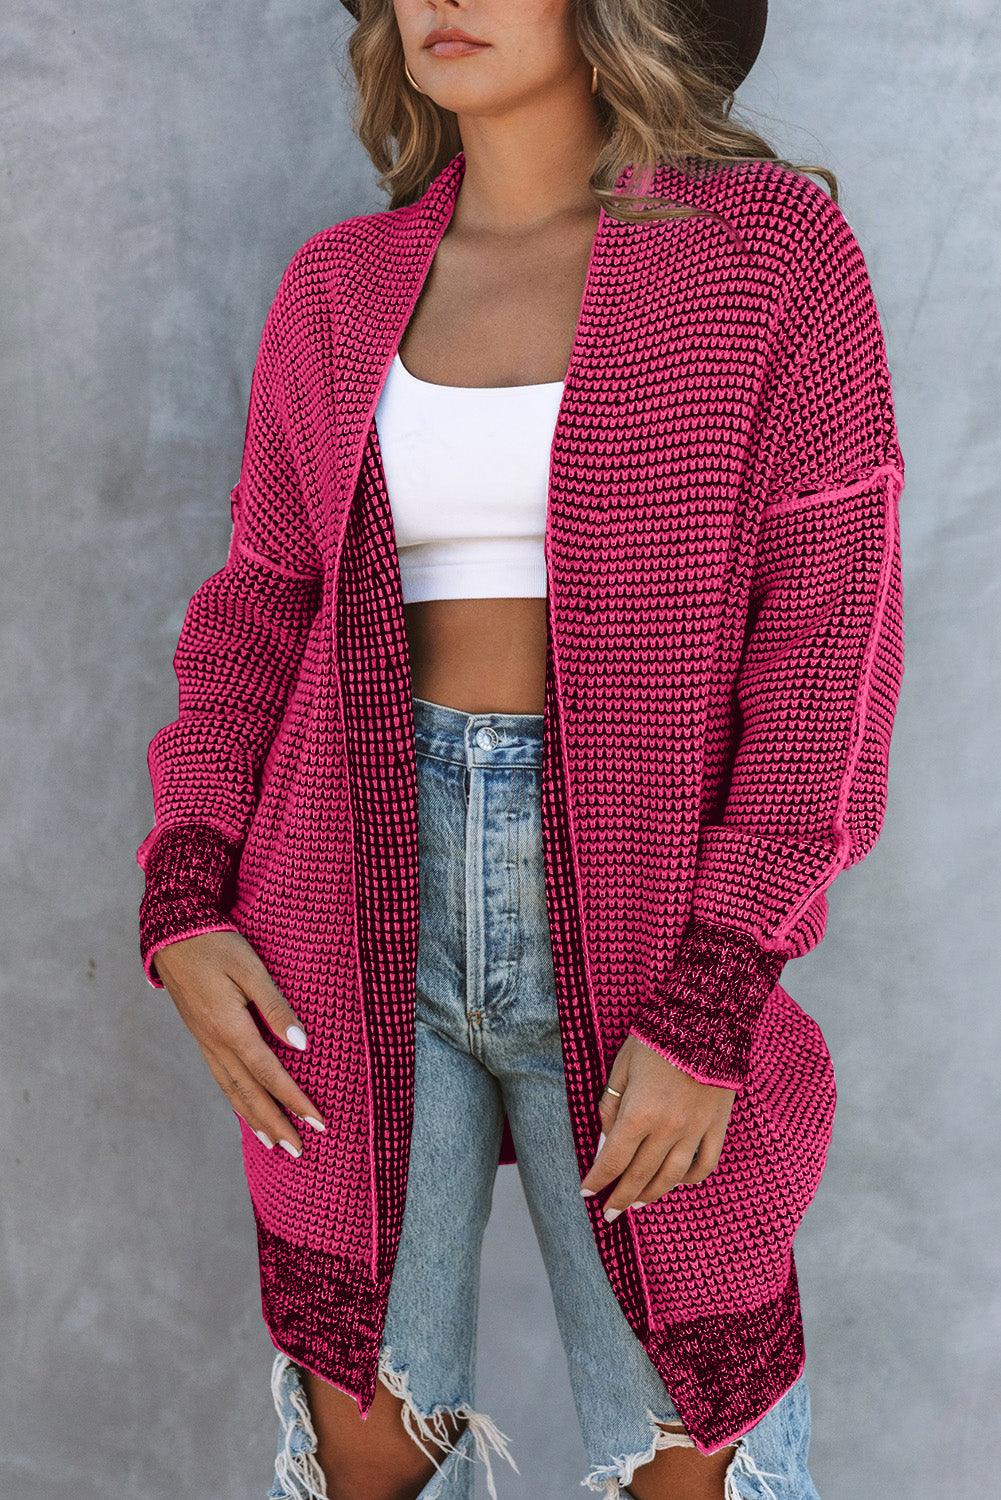 Rose Plaid Knitted Long Open Front Cardigan - L & M Kee, LLC